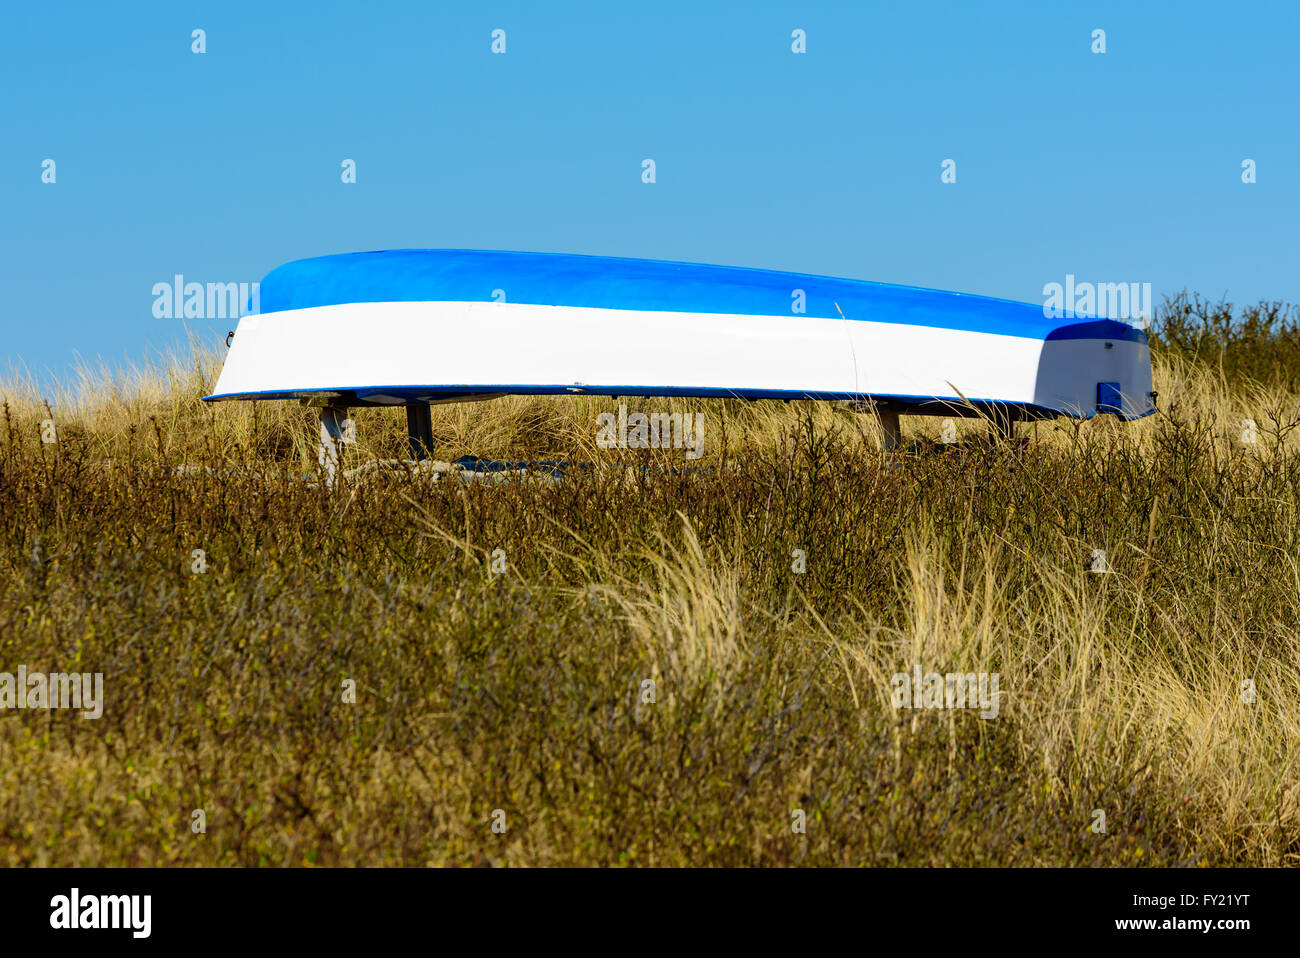 Blue and white upside down boat in the dry grass at the beach. Stock Photo